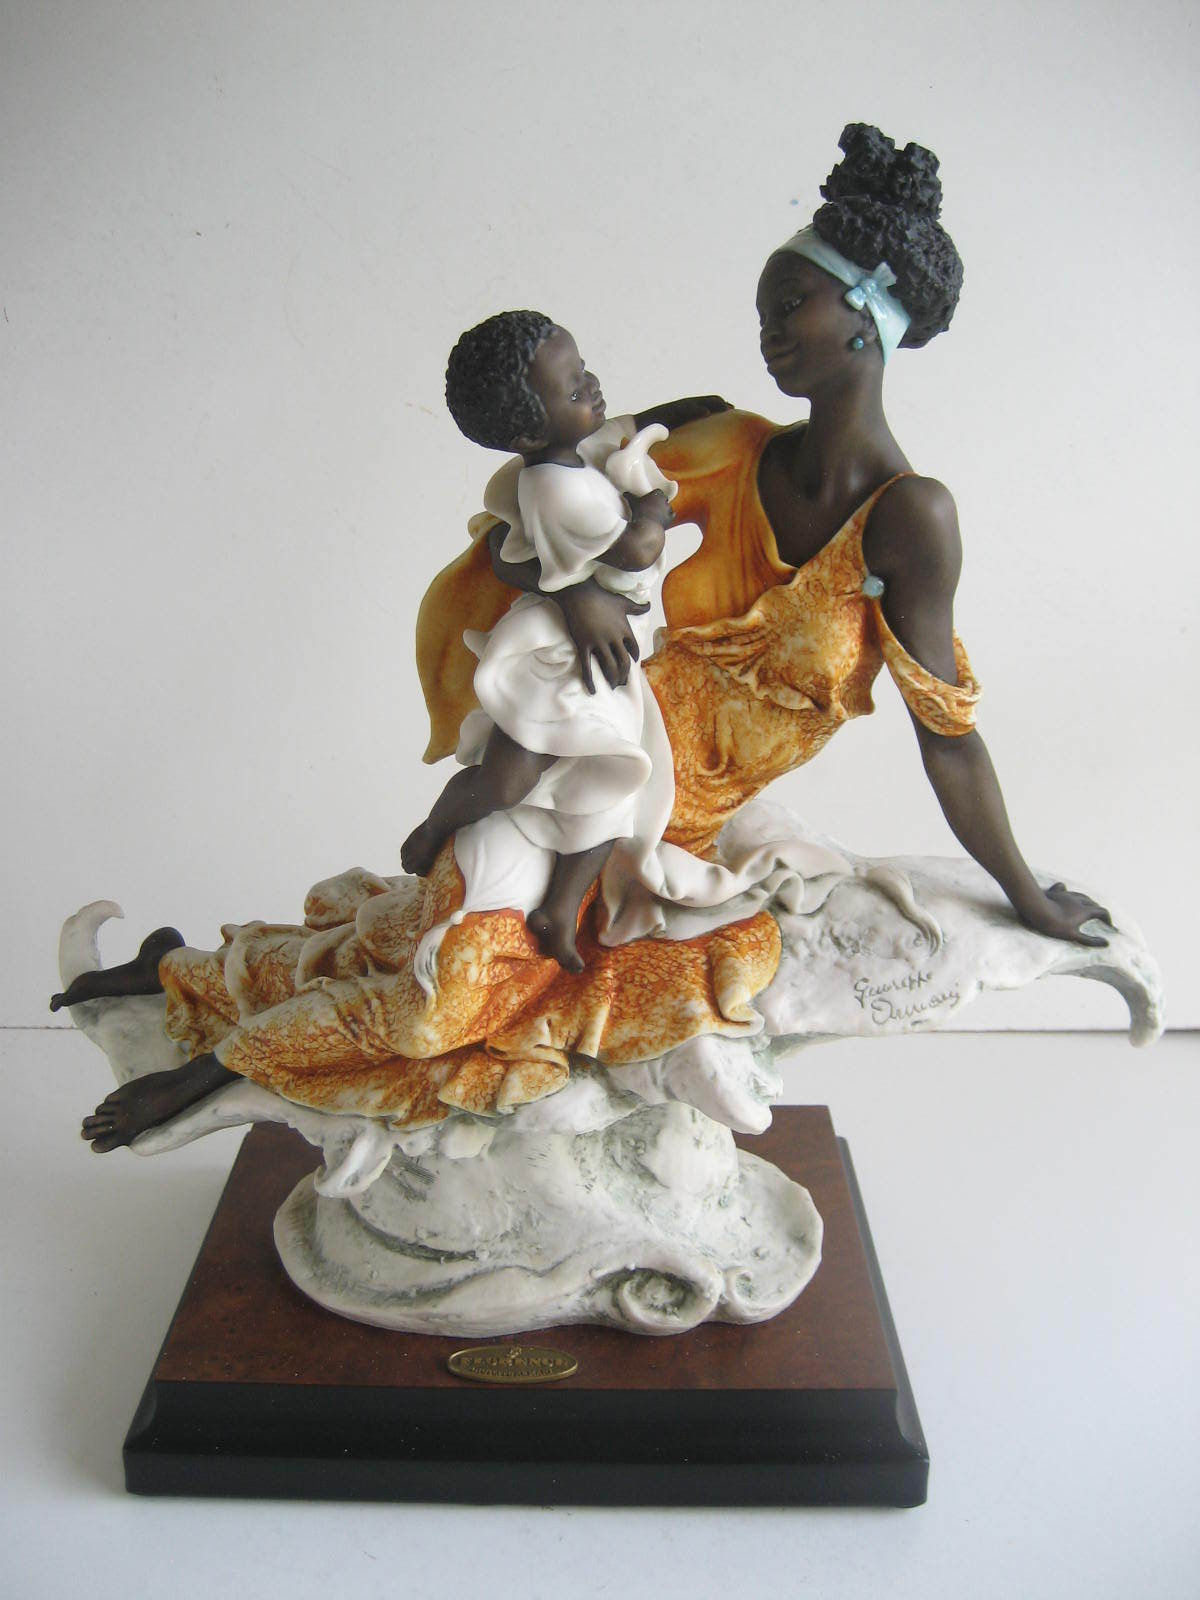 Giuseppe Armani Florence Black Maternity Figurine with Child 0502C --  Antique Price Guide Details Page